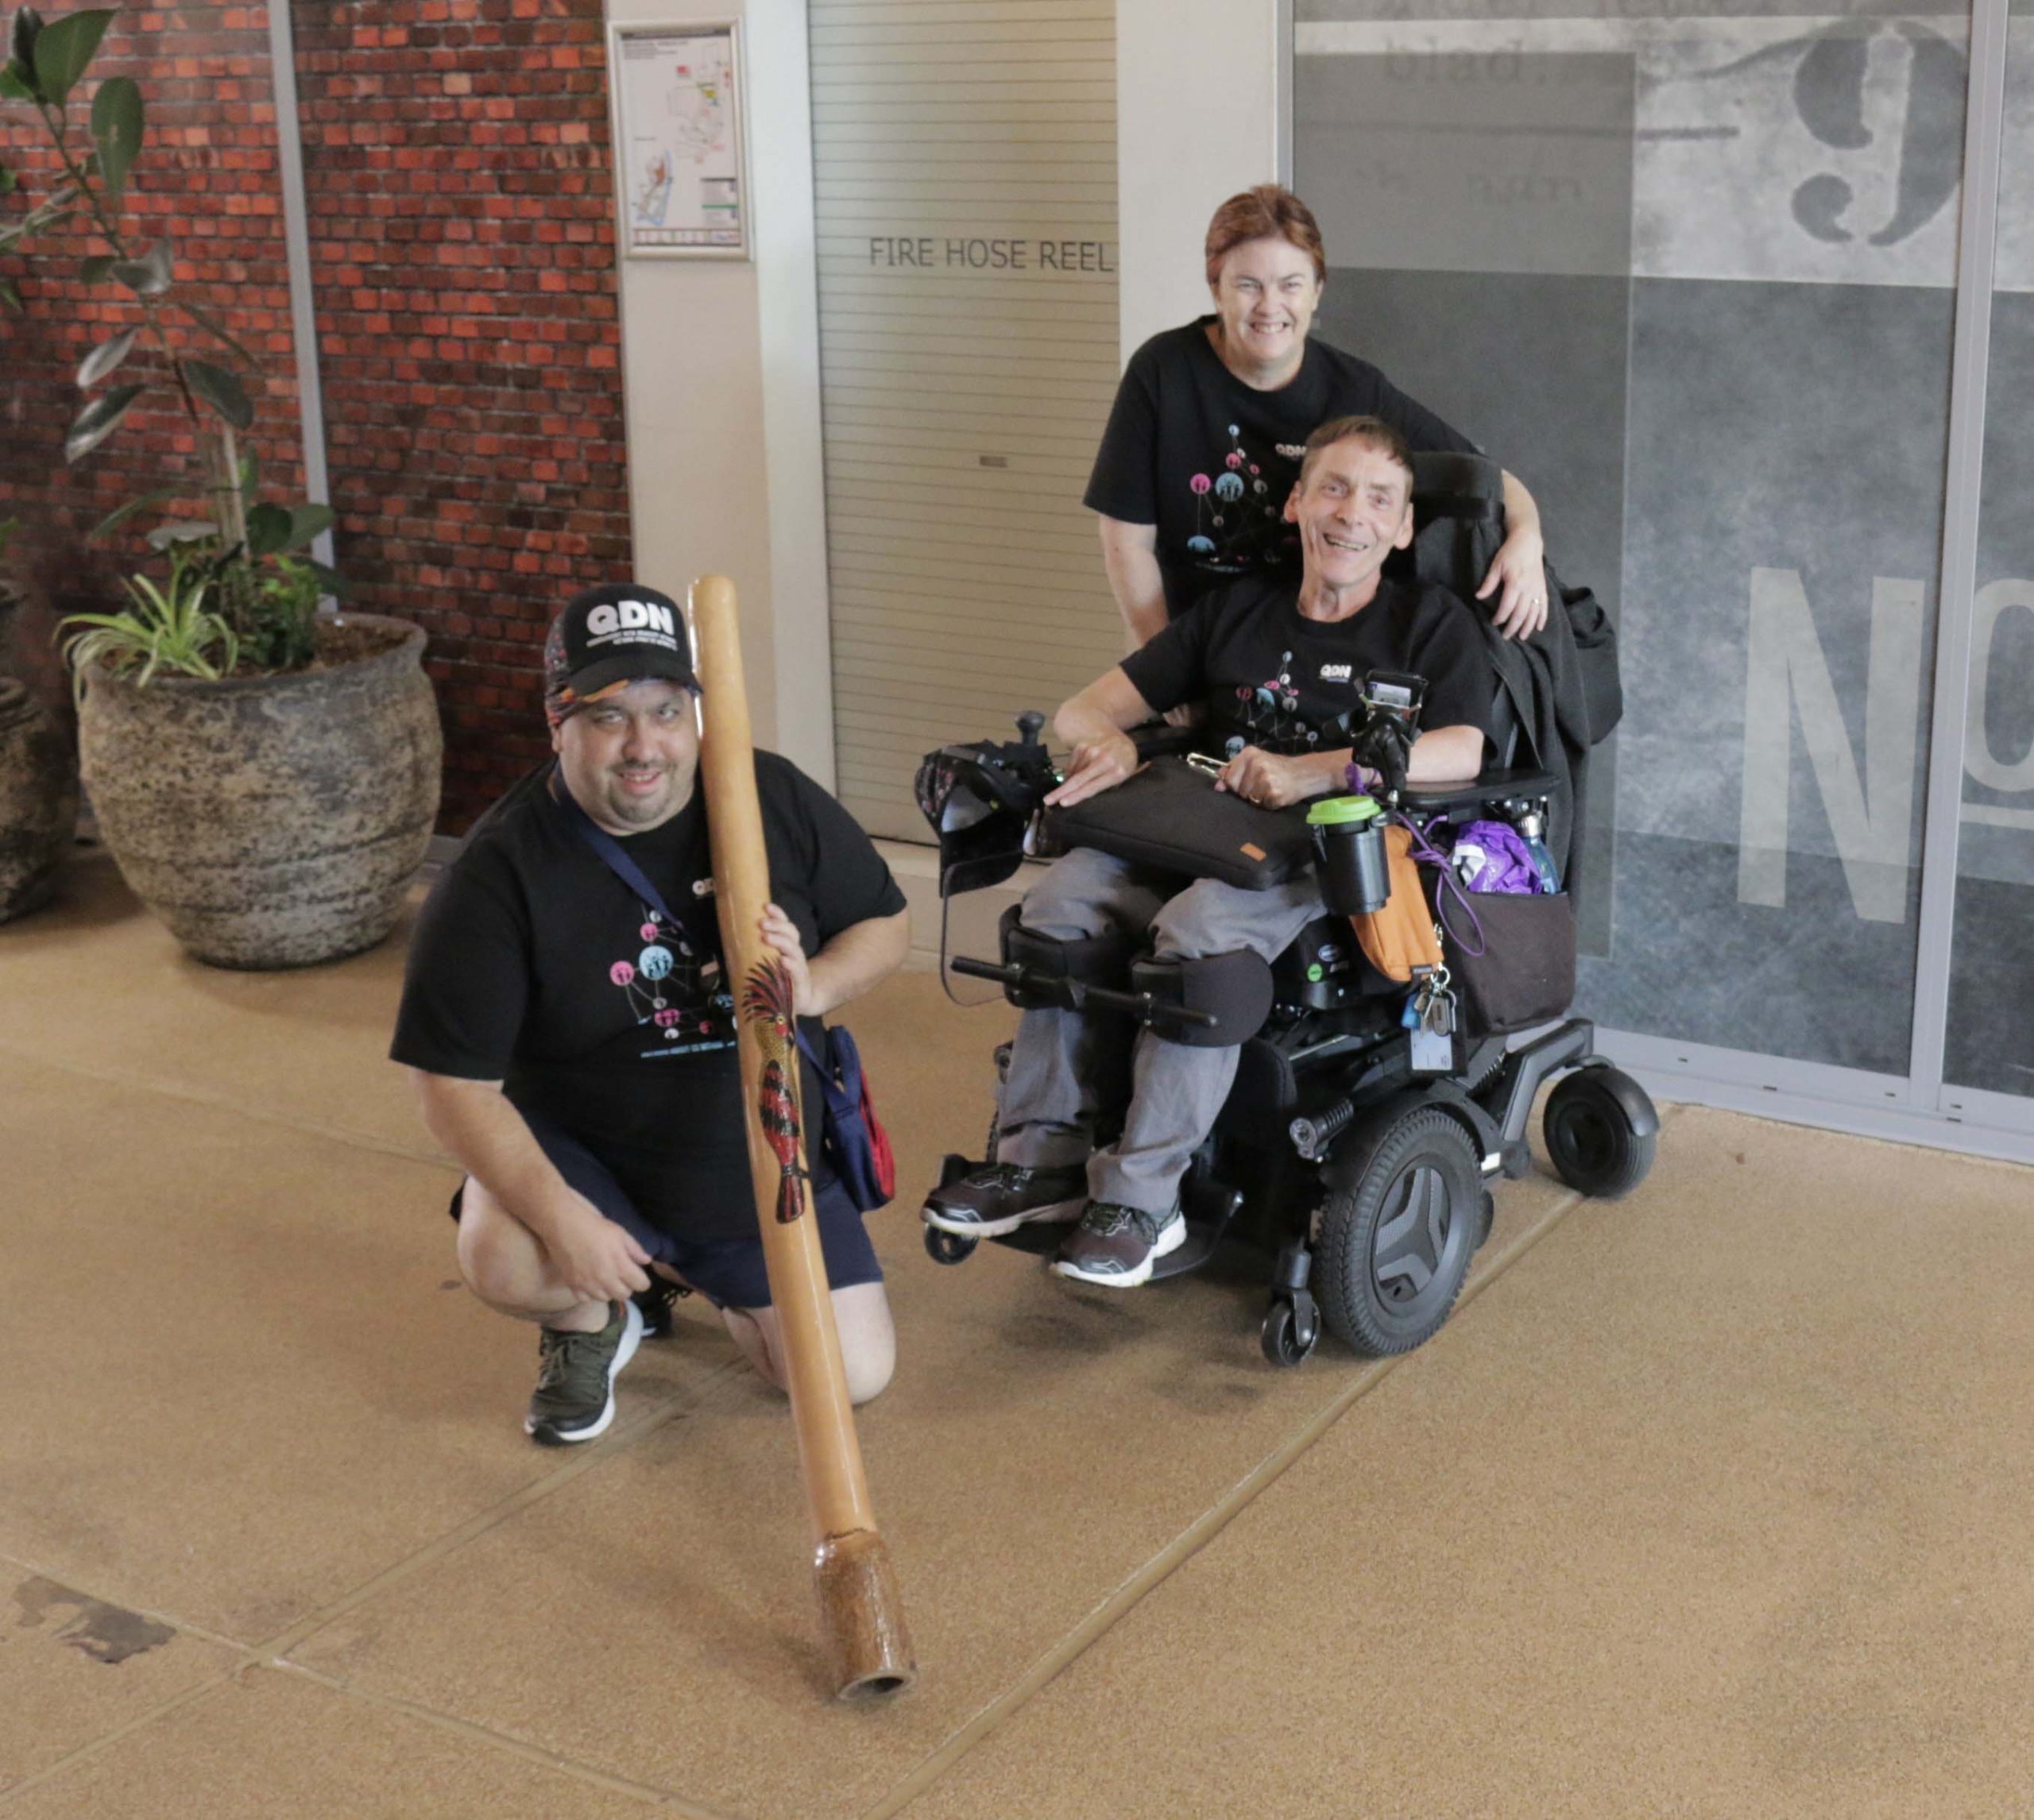 A man sitting in a wheelchair with a woman standing behind him and another man kneeling in front holding a didgeridoo. They are all wearing black QDN shirts.